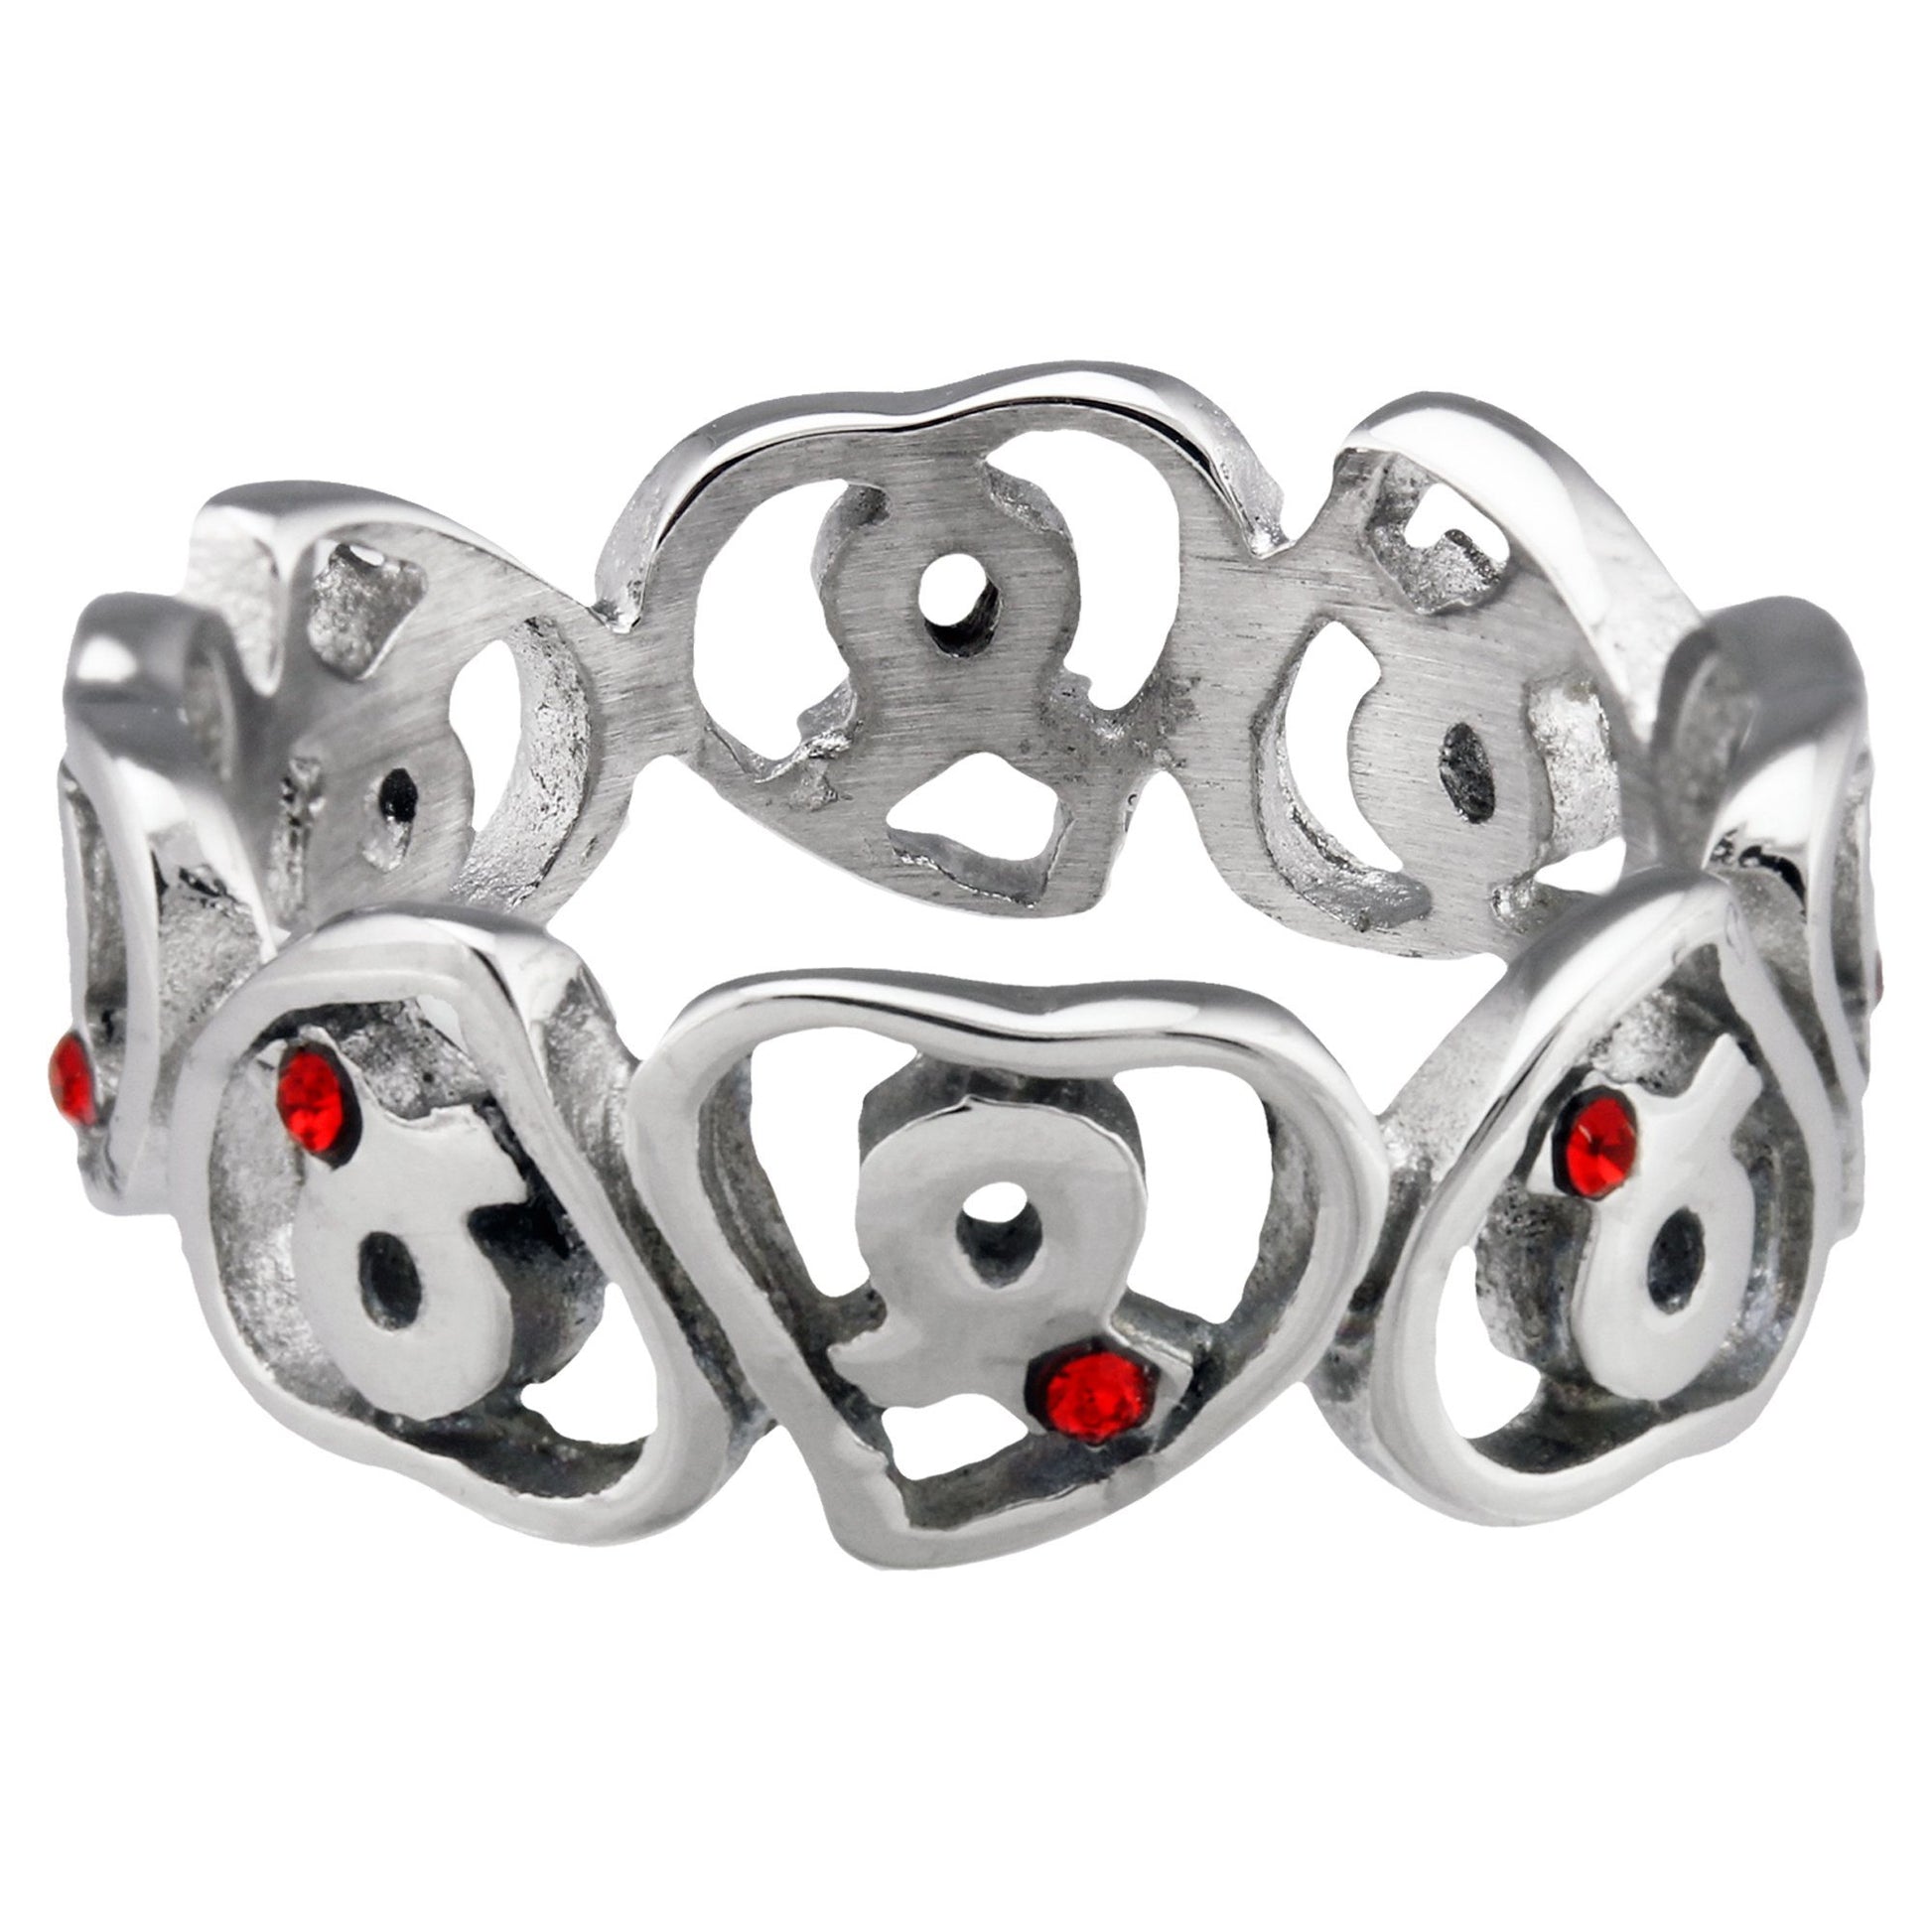 Diabetes Awareness Hearts Stainless Steel Ring